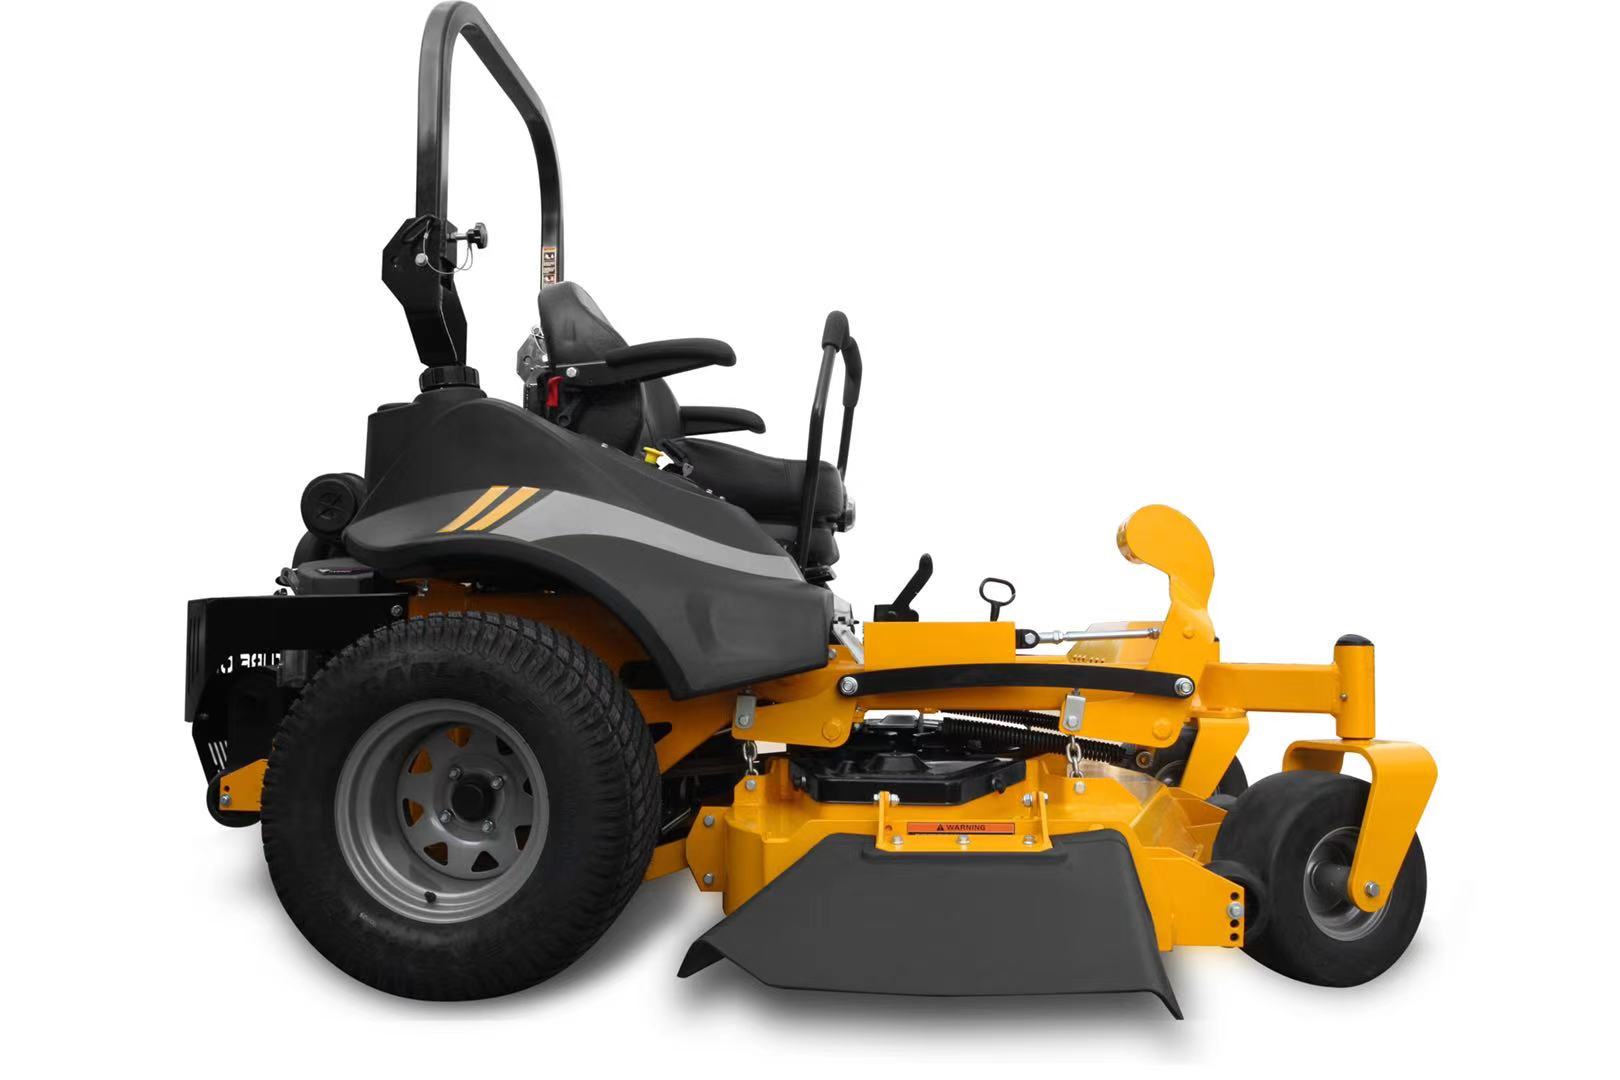 The Turf One Compass is what we consider to be the perfect all around ZTR mower.